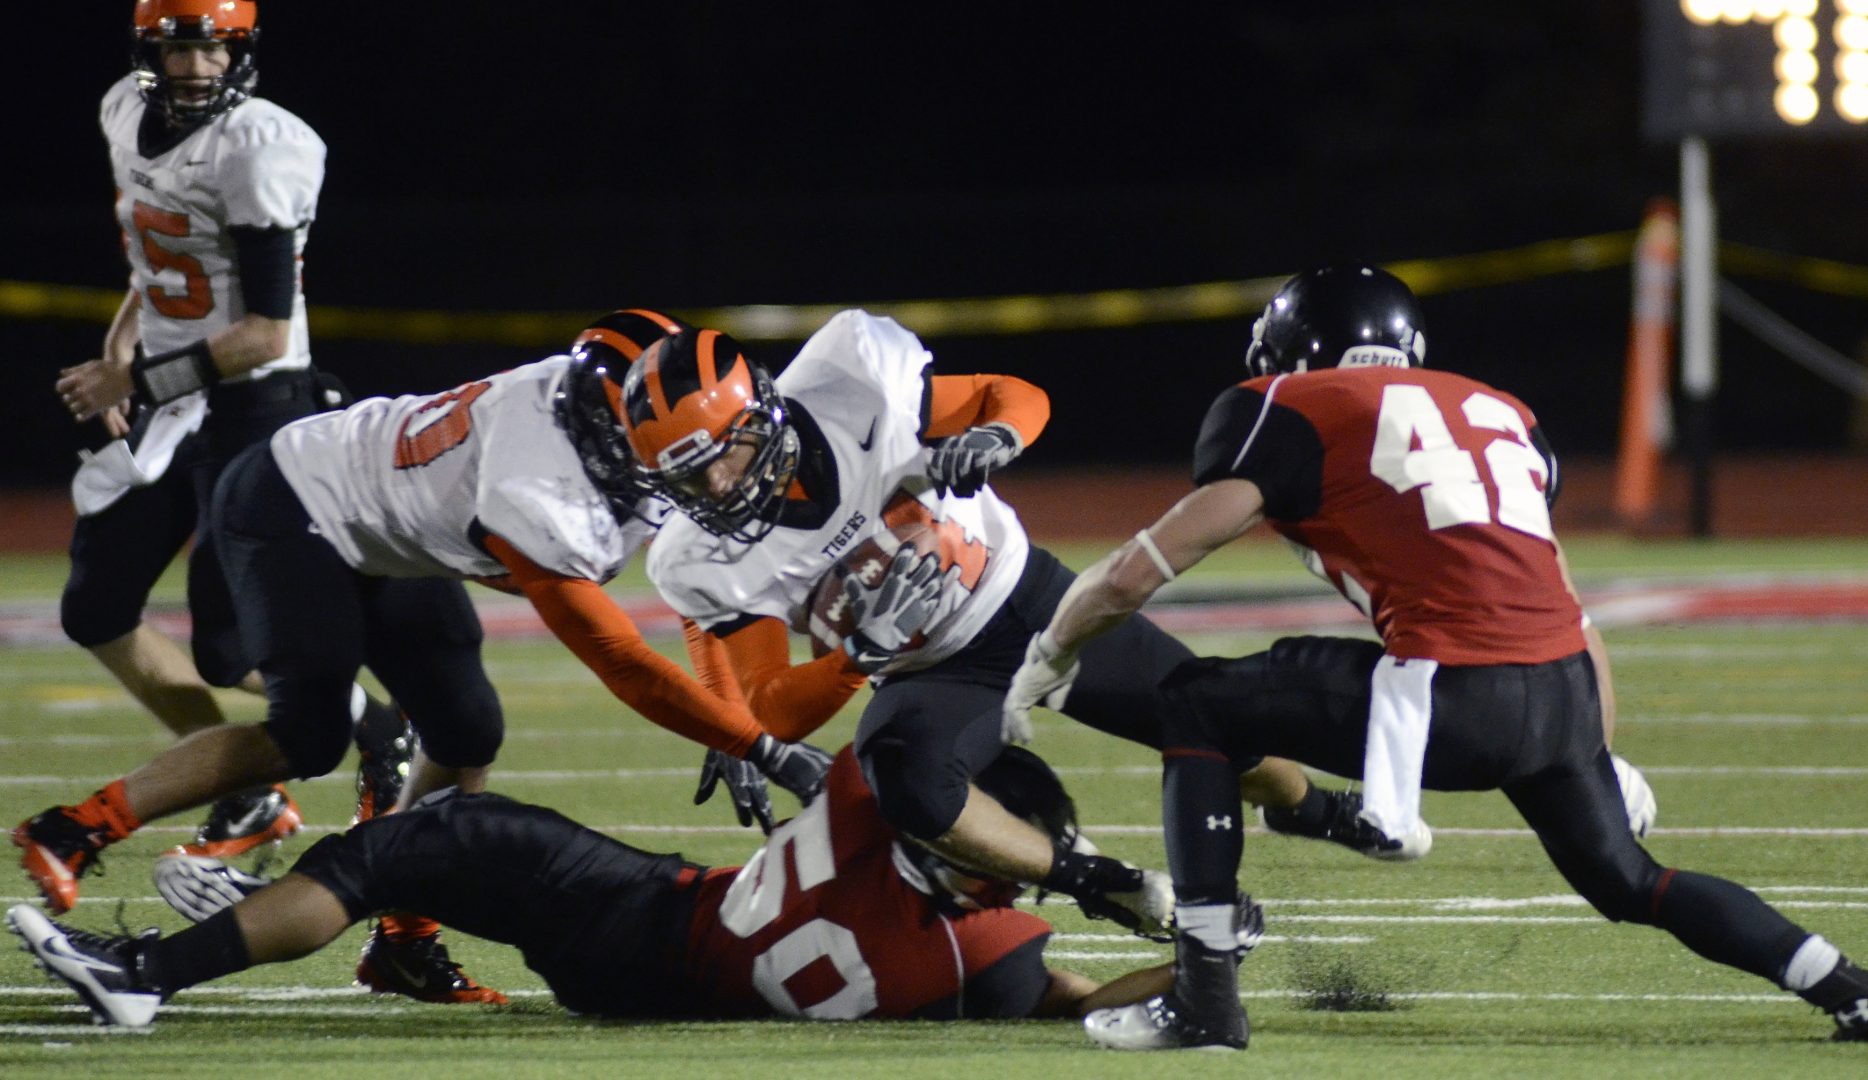 Princeton's Alex Momenee, center, picks up yardage during the second half of an NCAA college football game against Mansfield in Mansfield, Pa. on Sept. 14, 2013. 